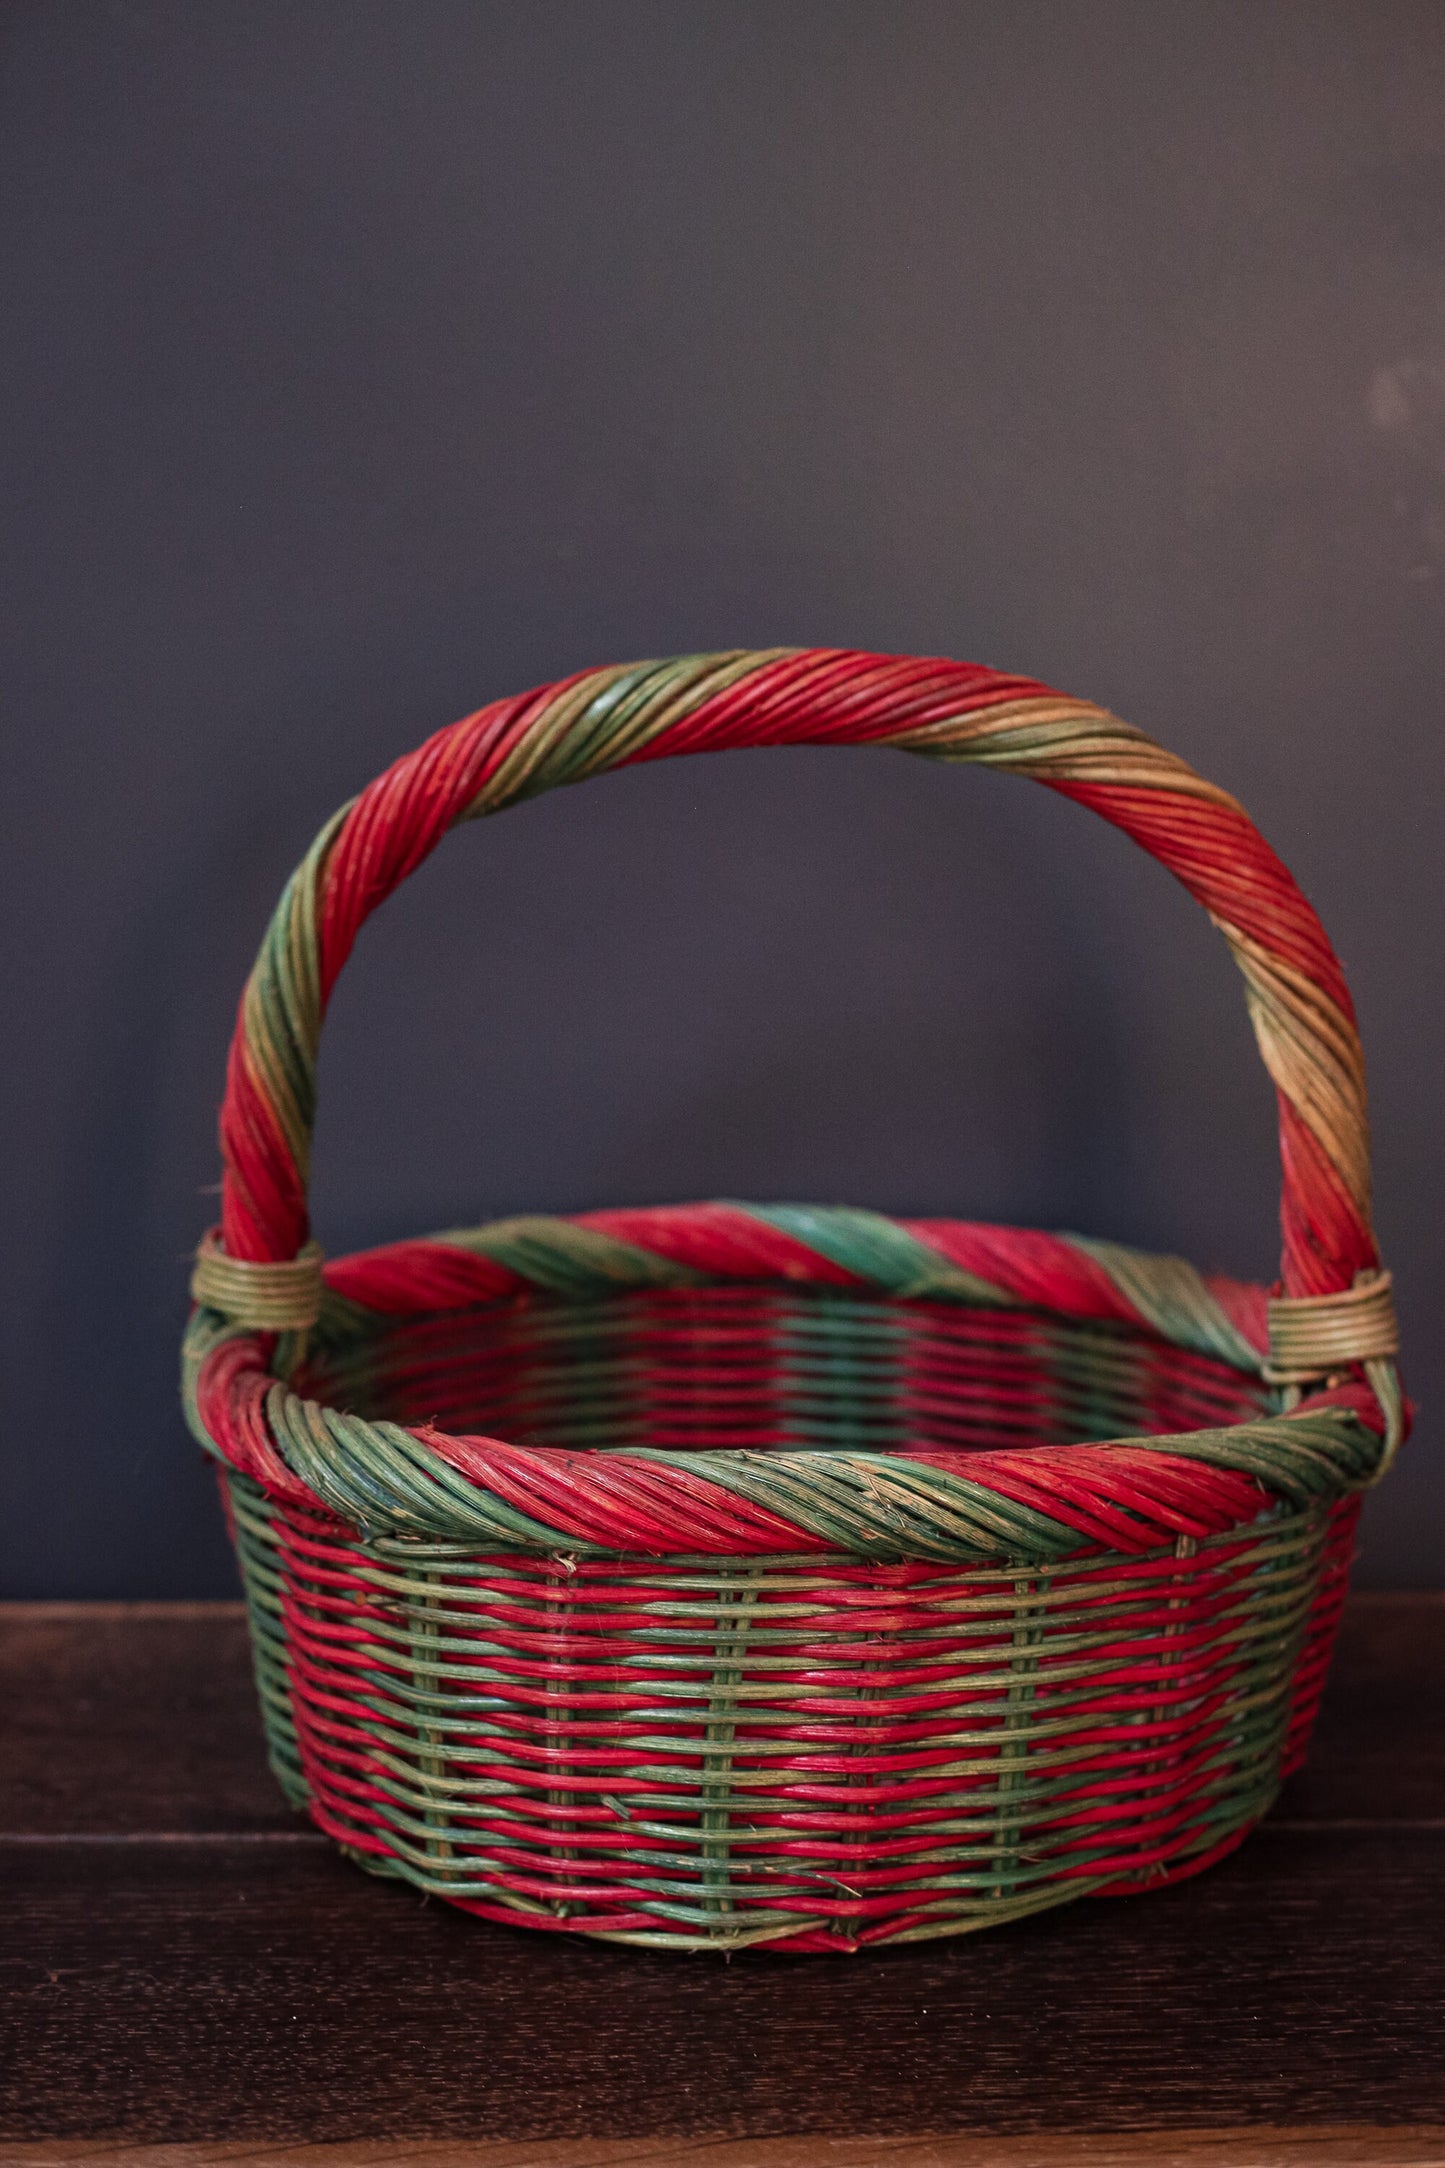 Red & Green Candy Cane Stripe Wicker/Rattan Christmas Basket - Vintage Basket Holiday Decor